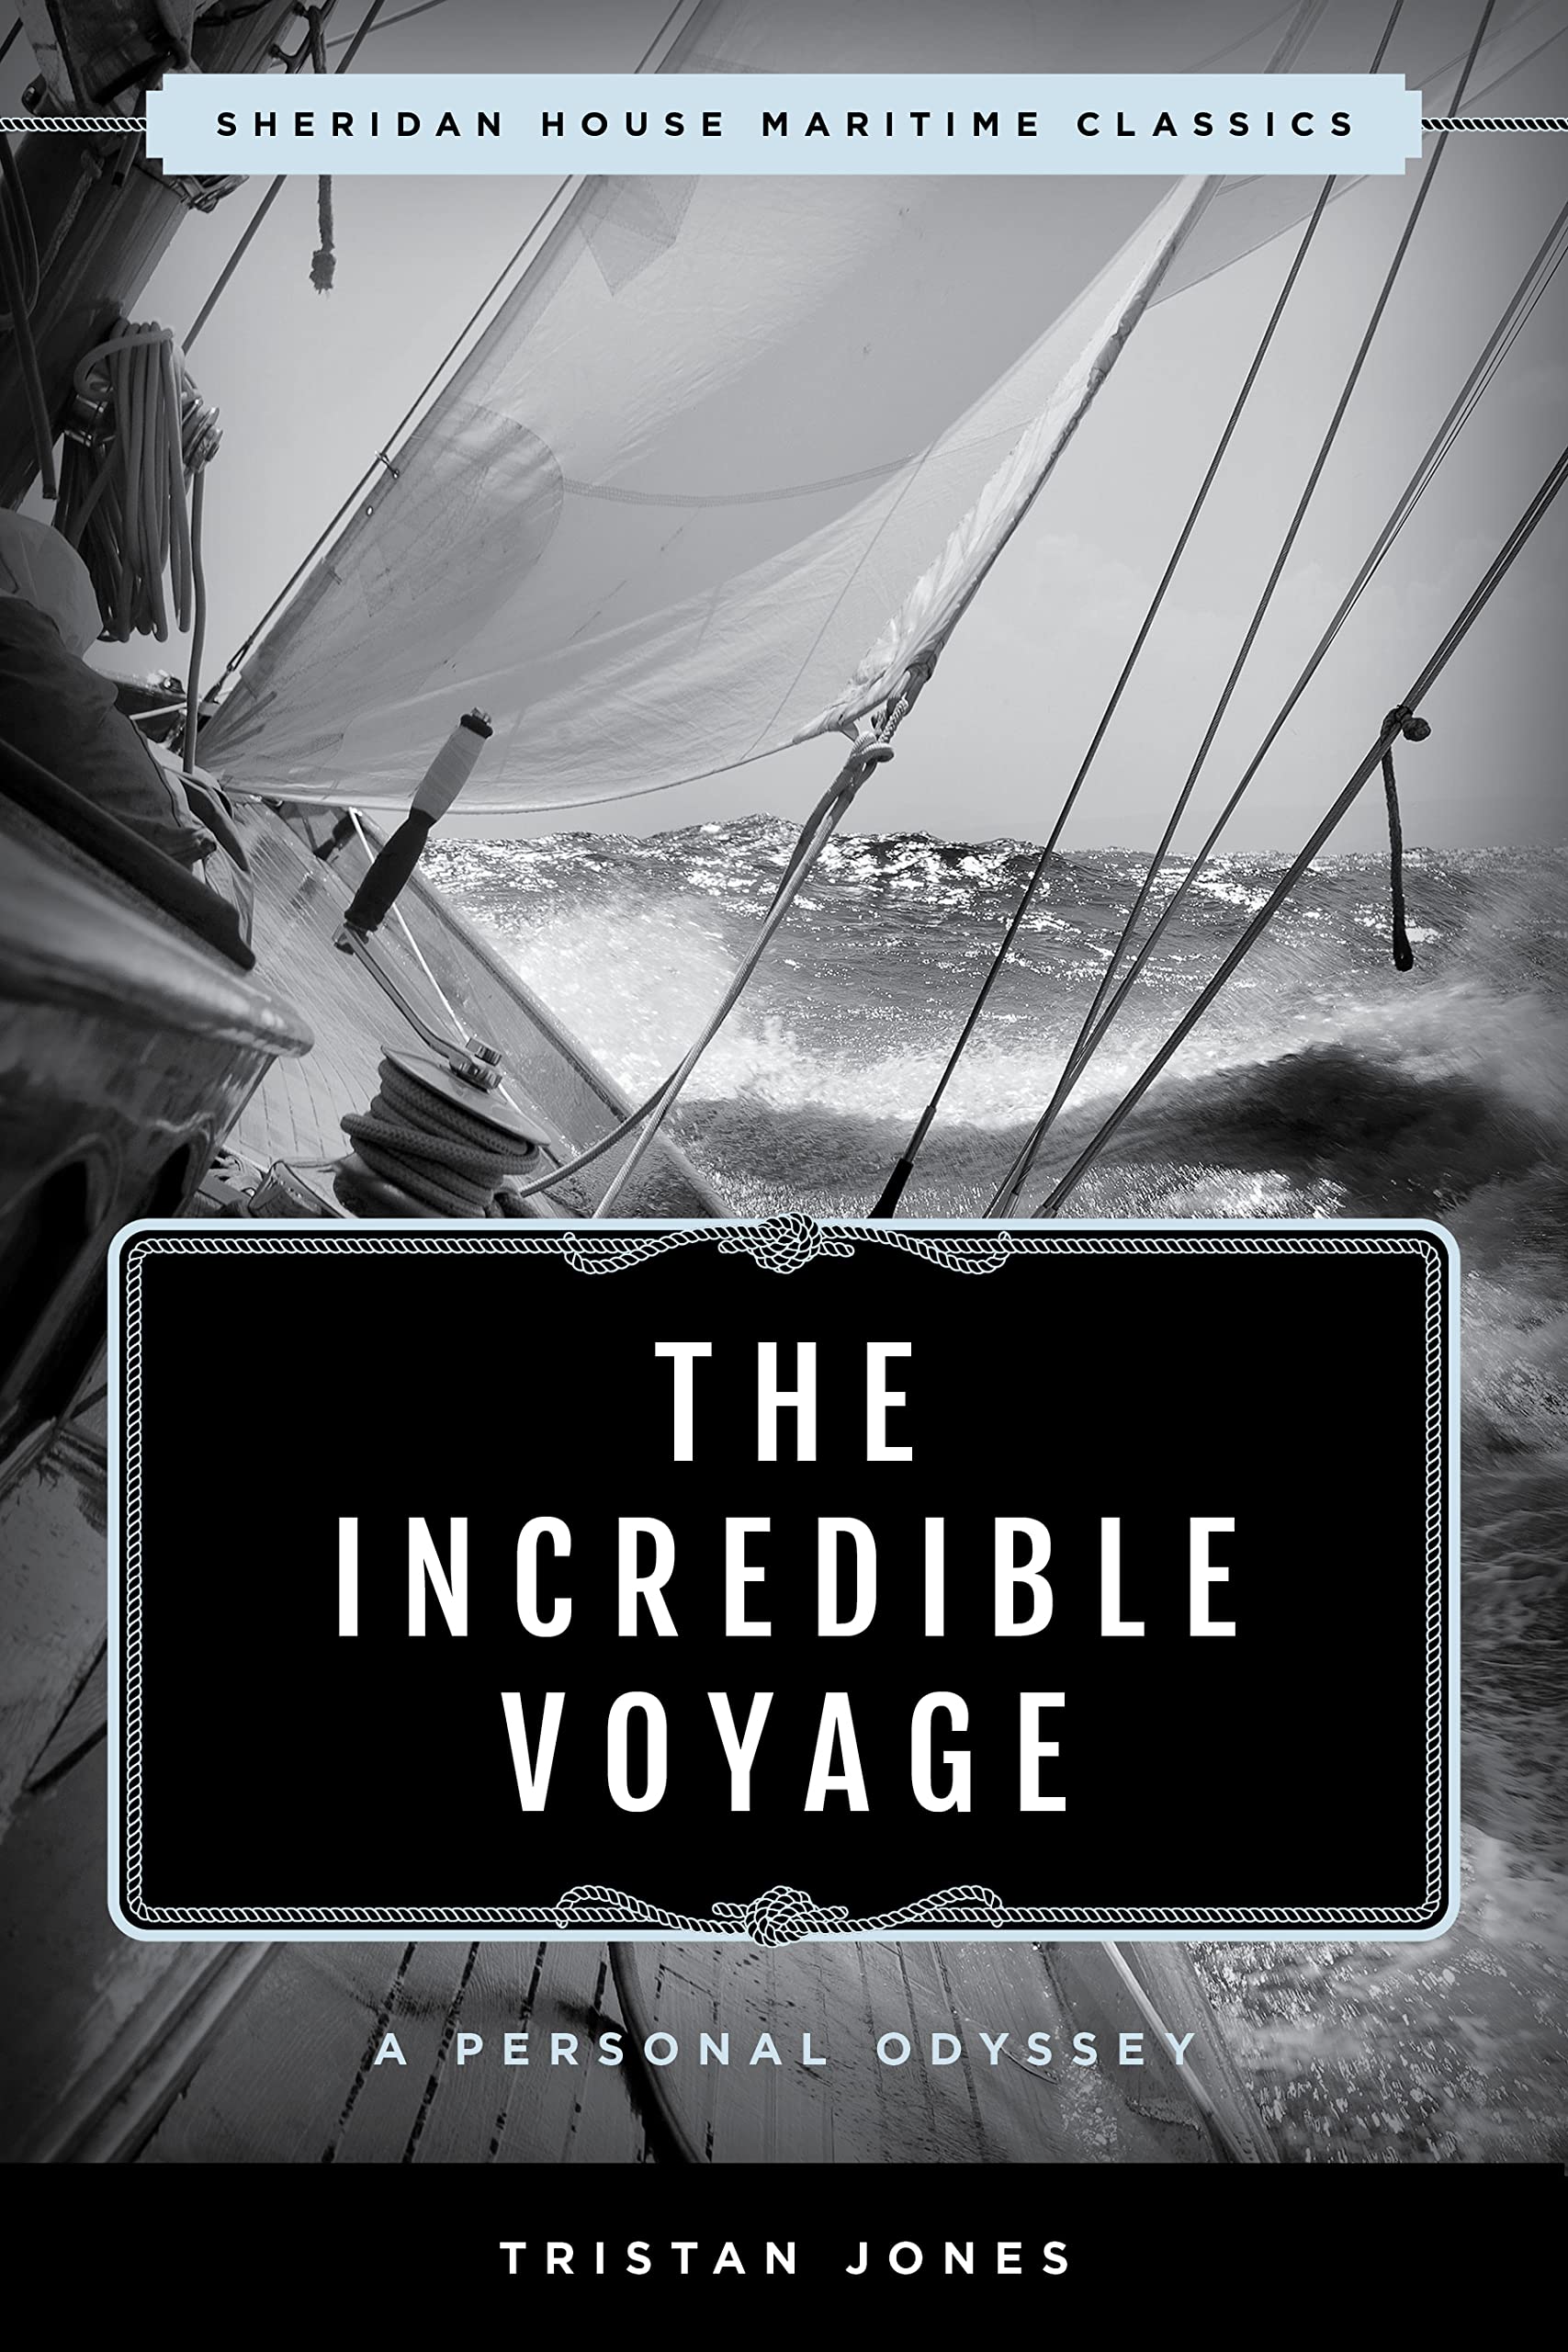 The Incredible Voyage: A Personal Odyssey